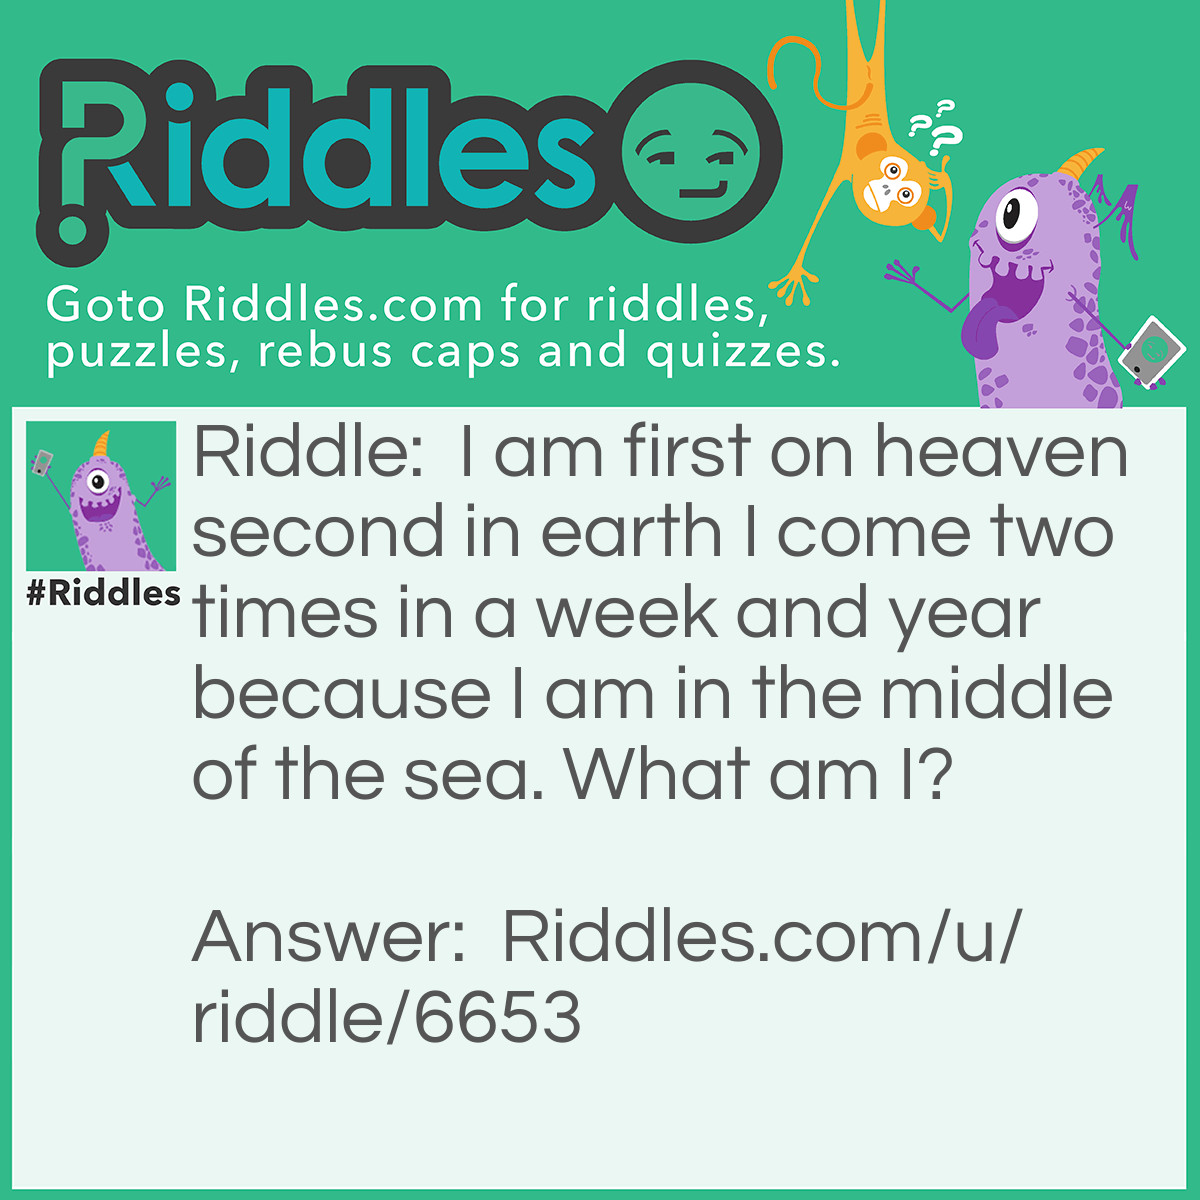 Riddle: I am first on heaven second in earth I come two times in a week and year because I am in the middle of the sea. What am I? Answer: The letter E.